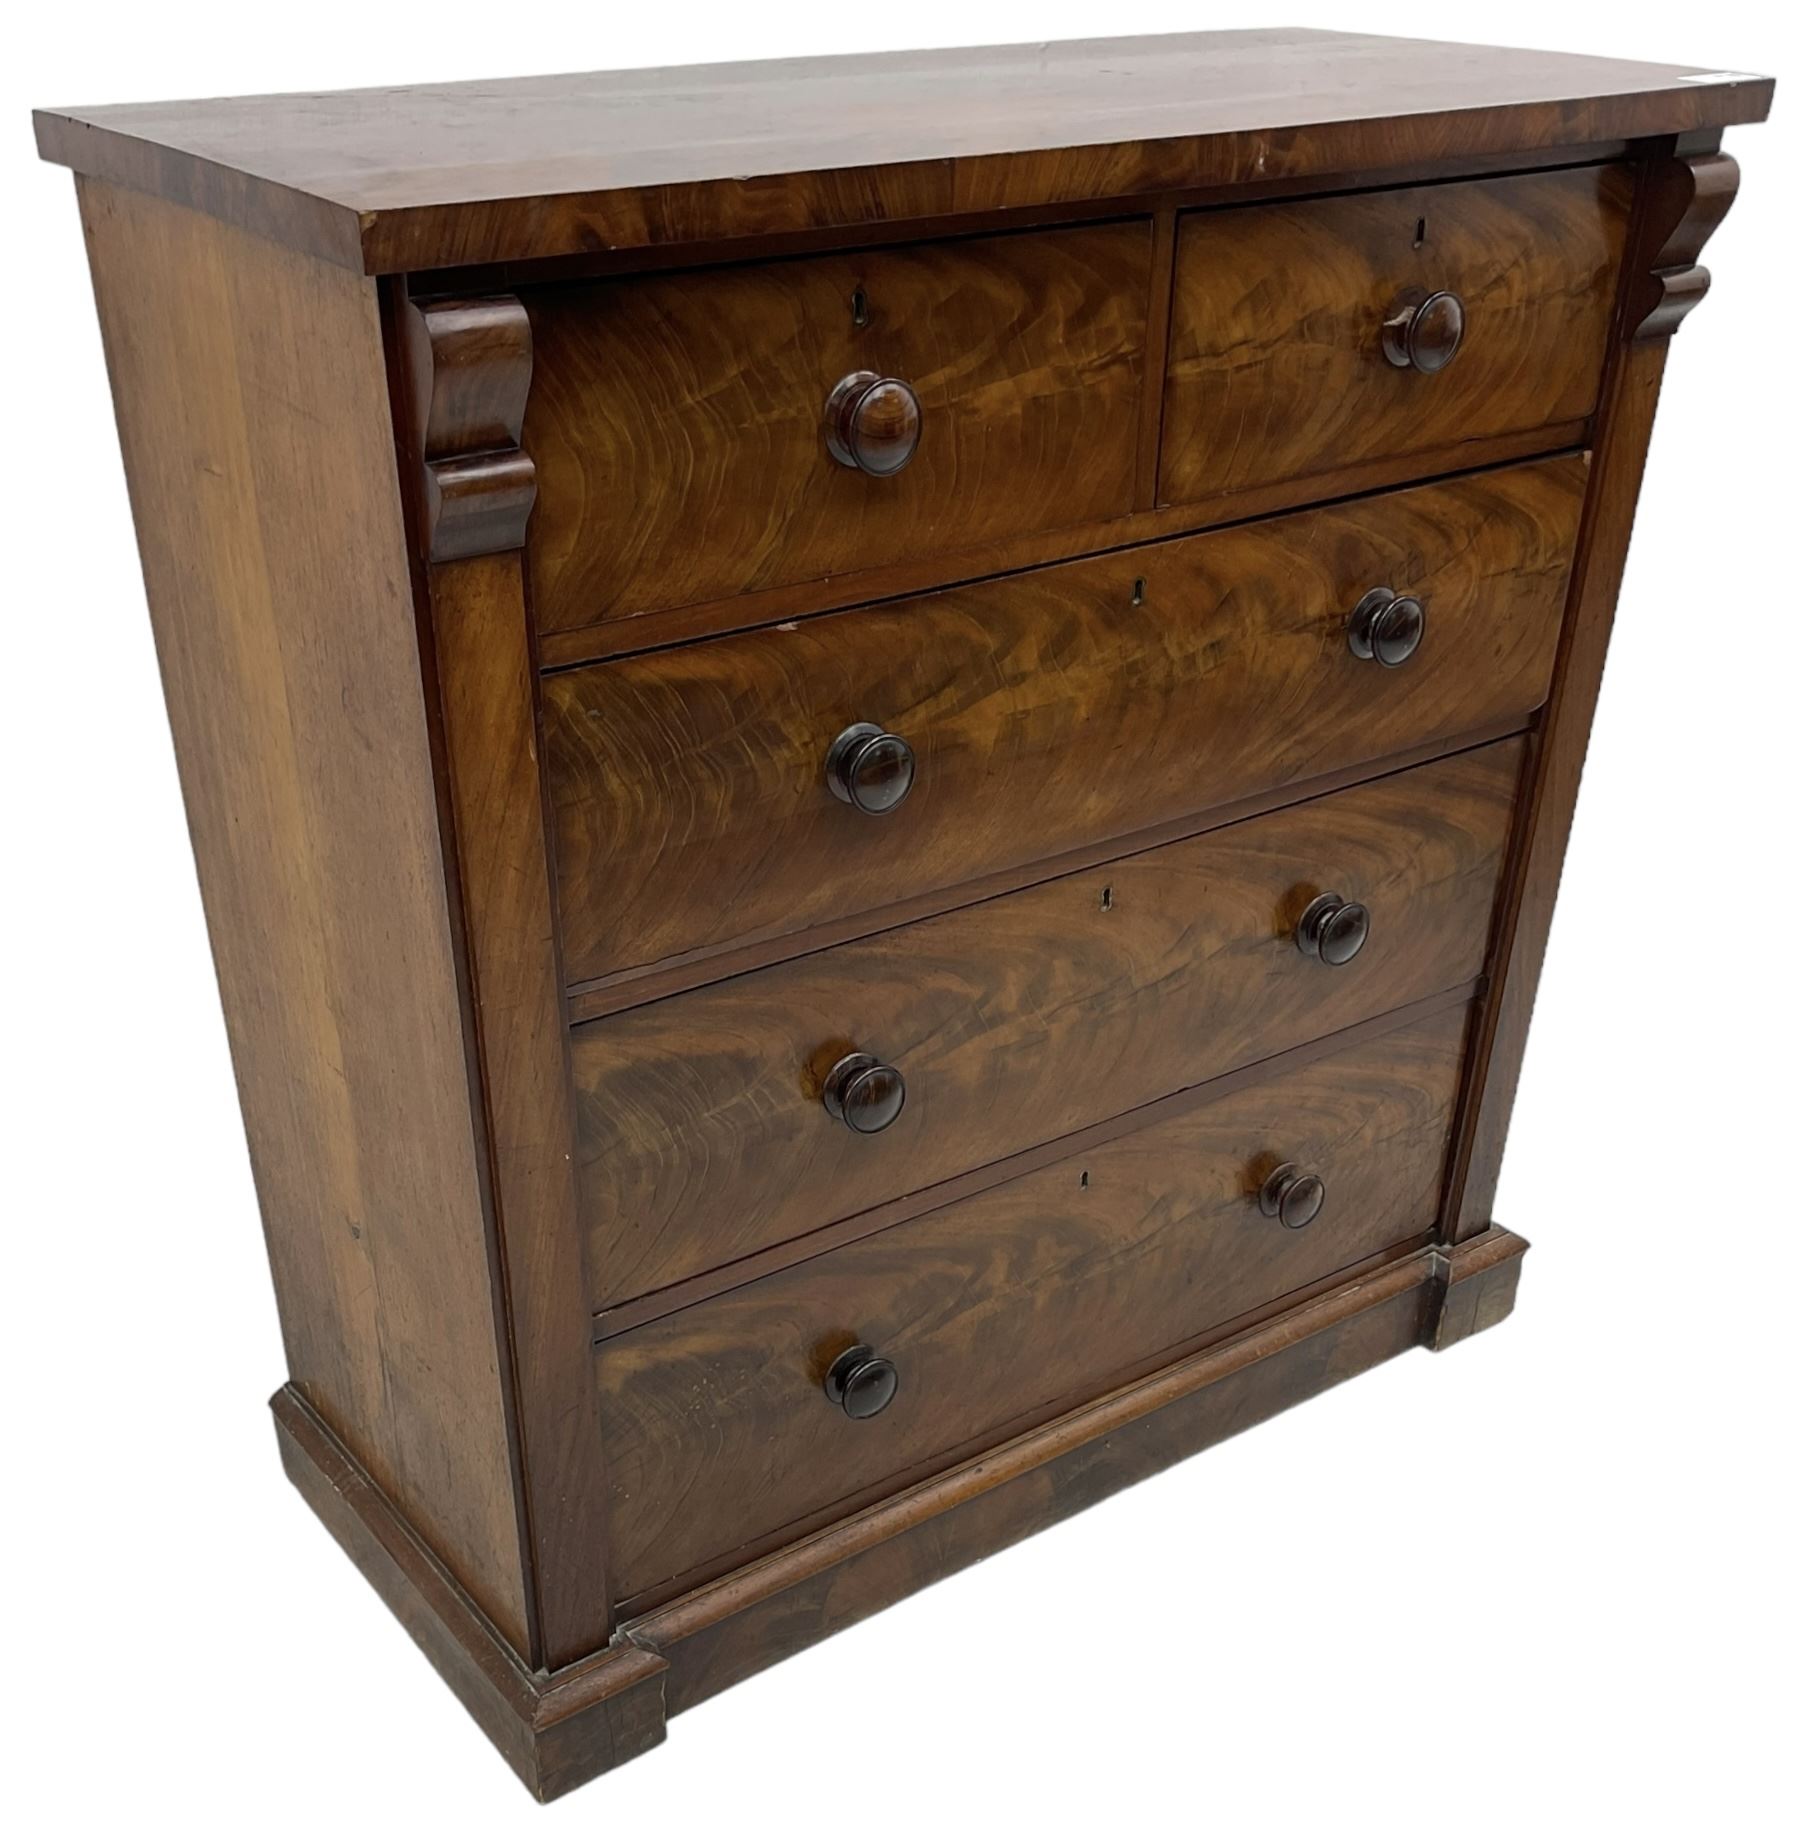 Victorian figured mahogany straight-front chest - Image 8 of 8